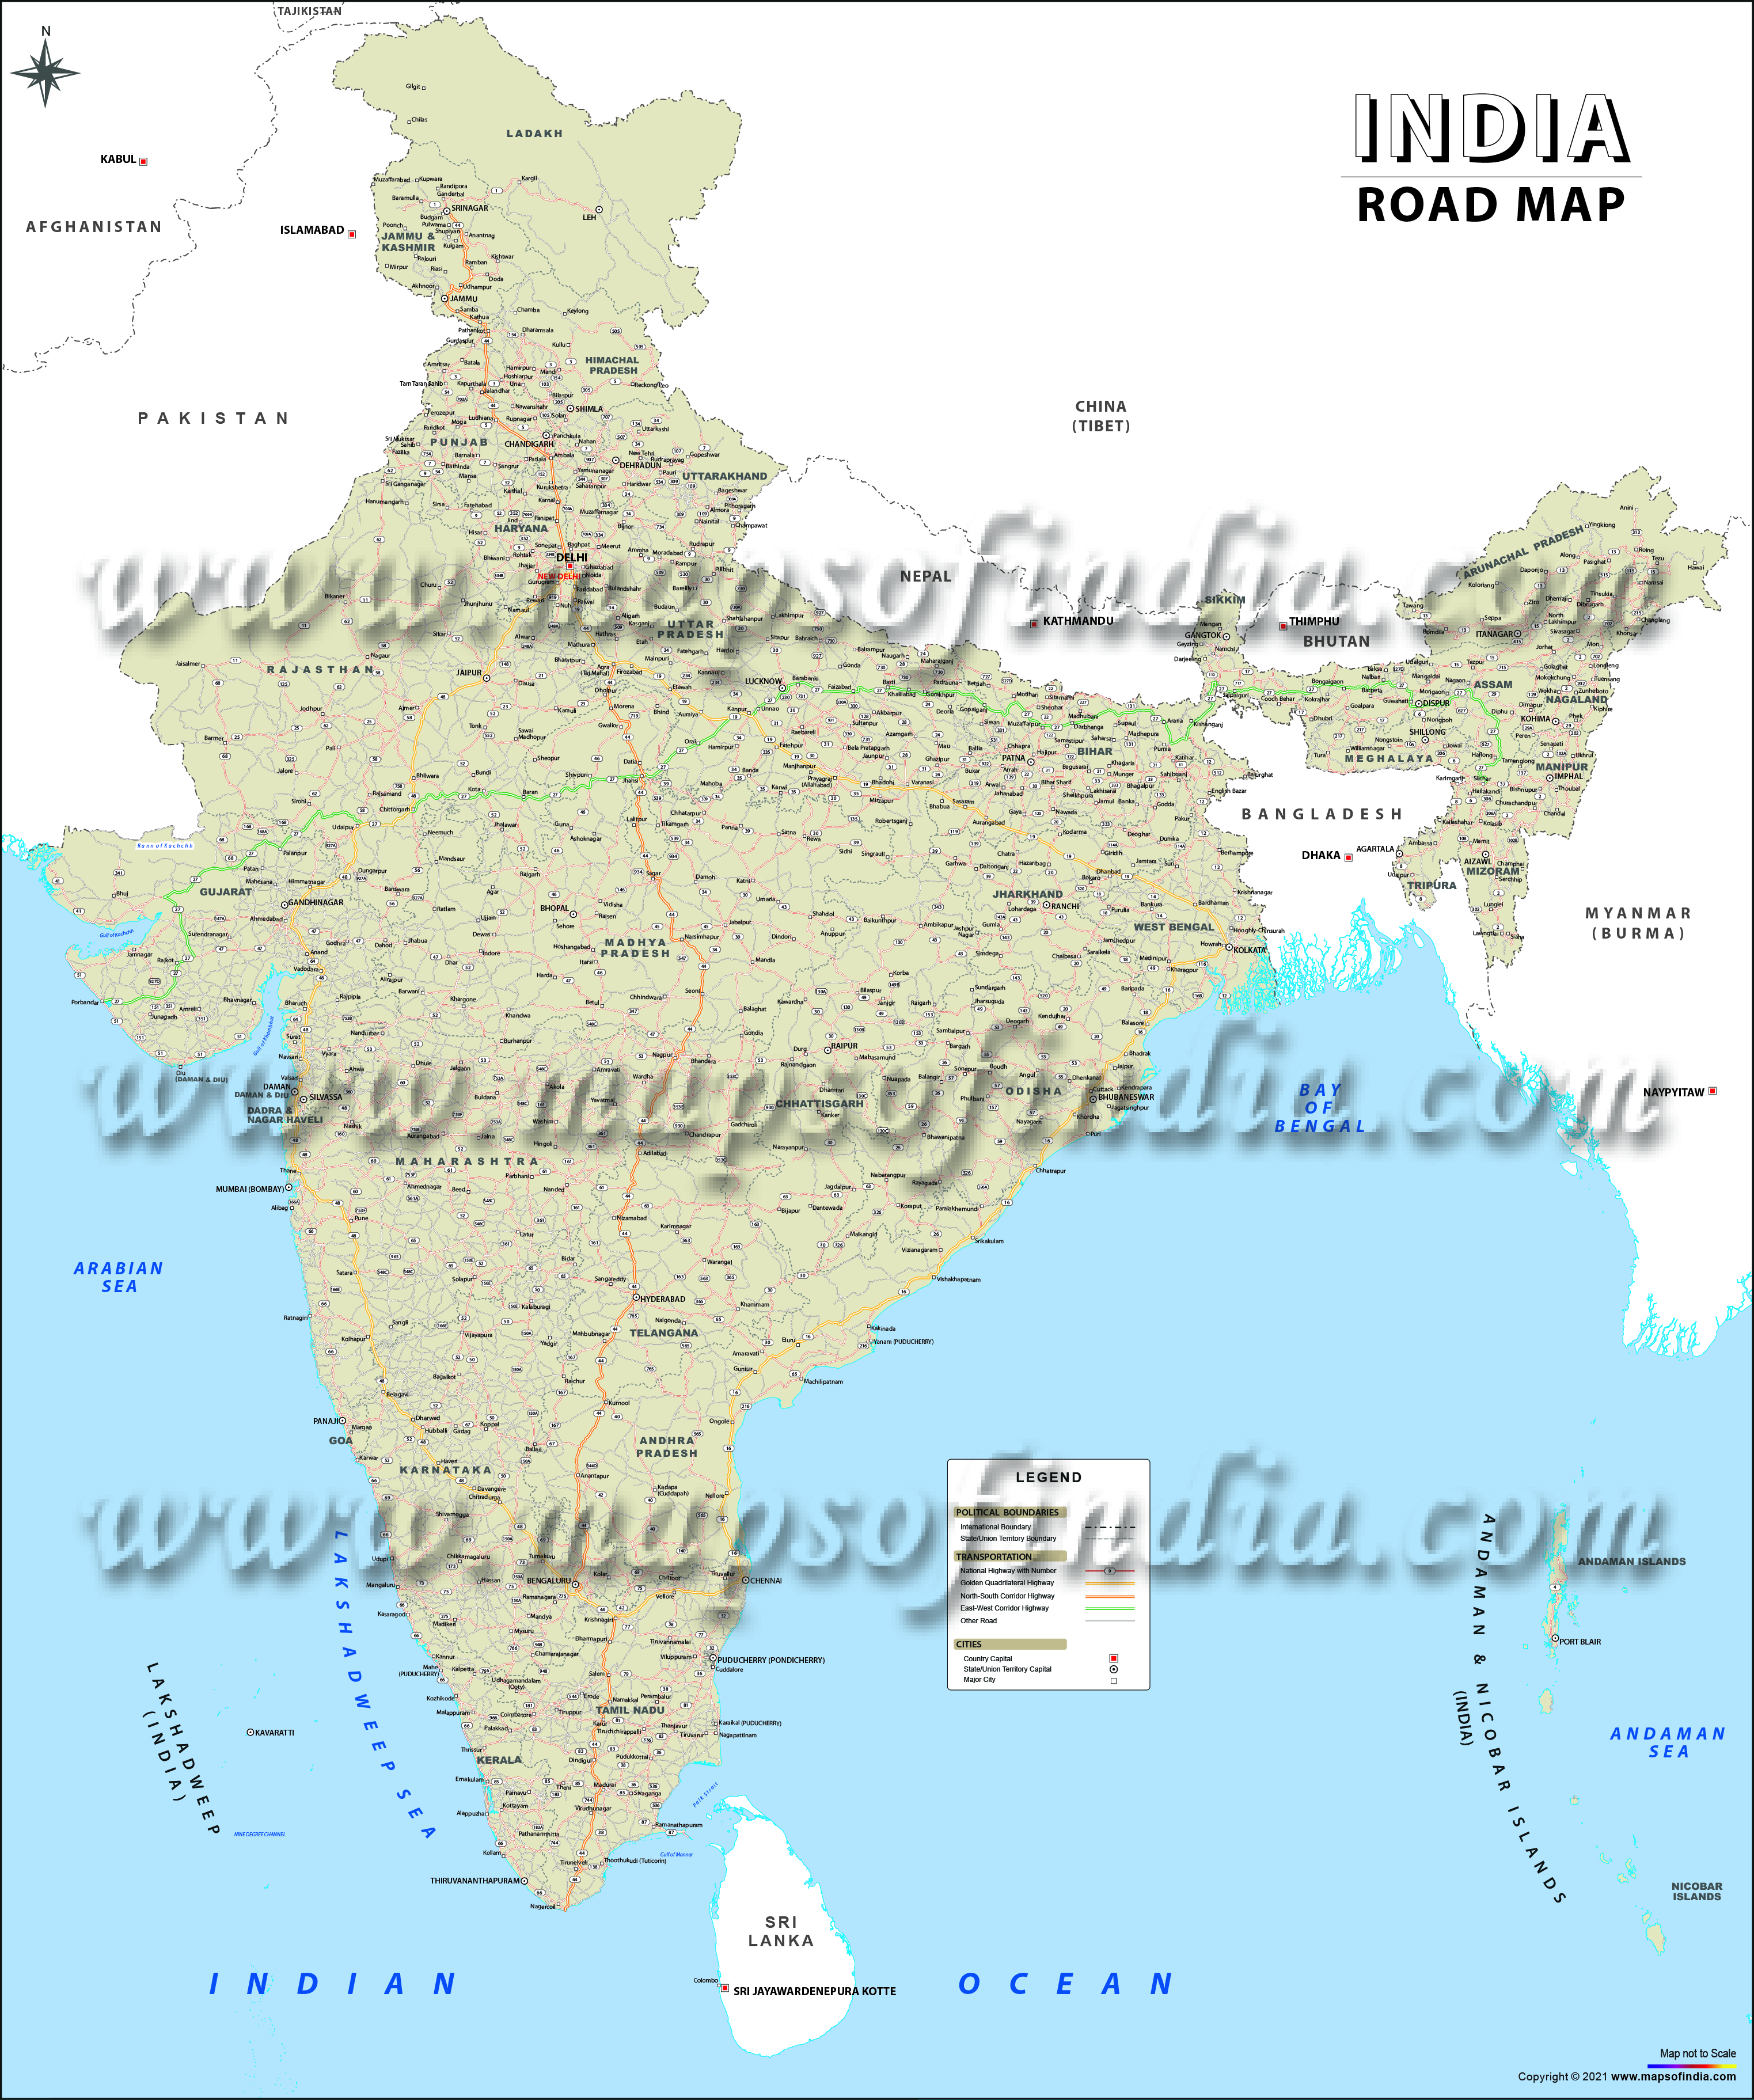 Roadway Map Of India India Road Maps, Indian Road Network, List of Expressways India